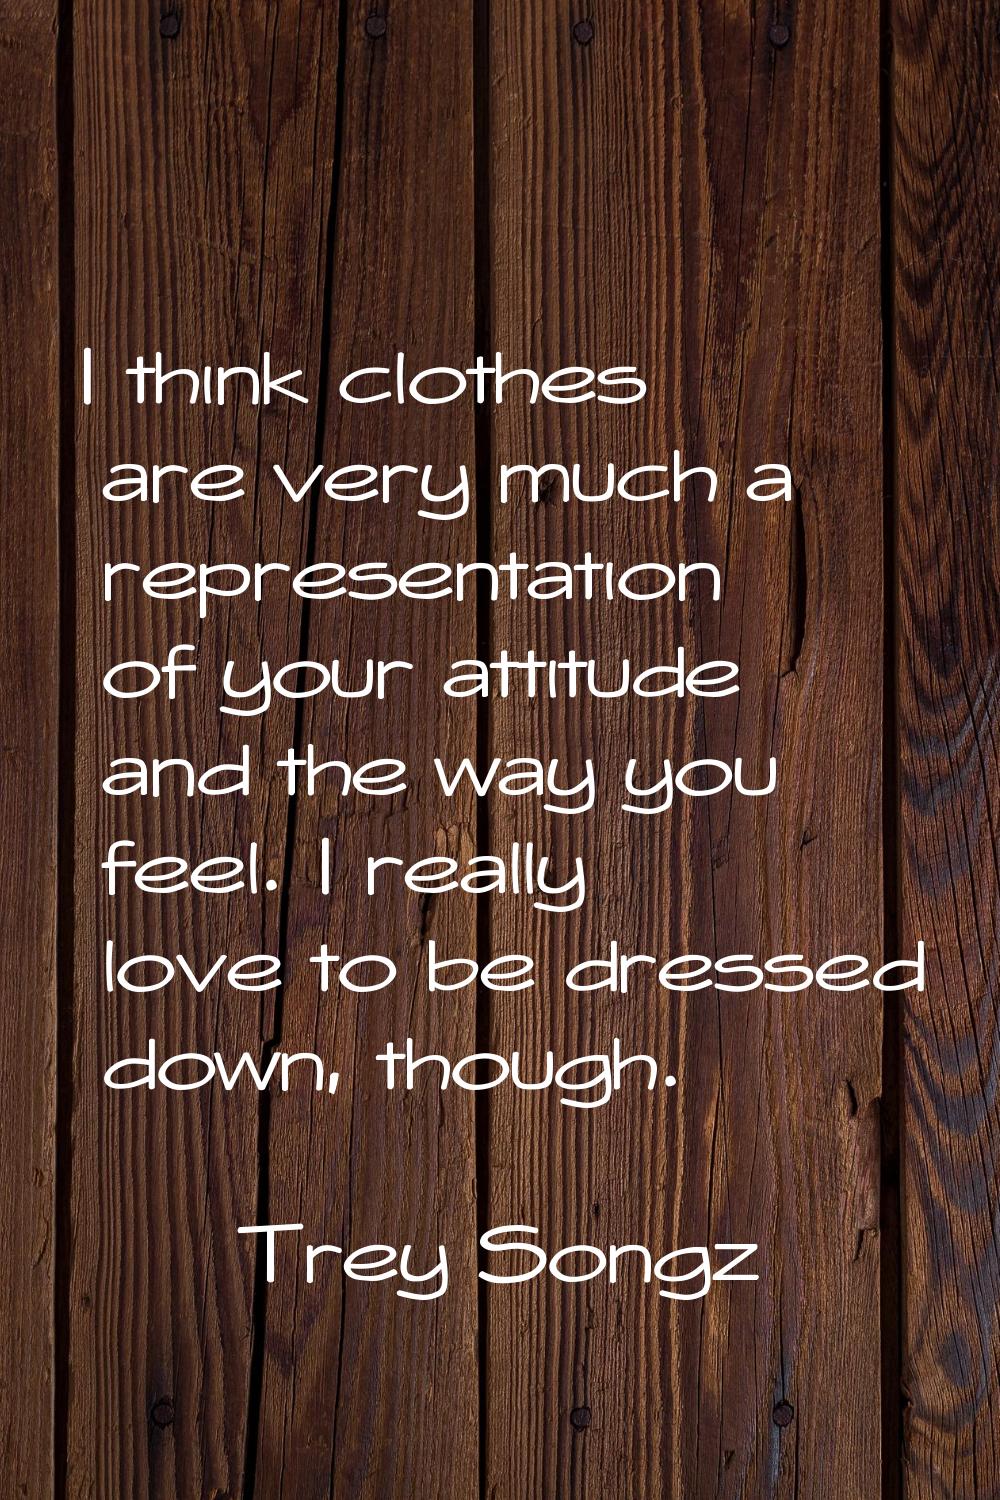 I think clothes are very much a representation of your attitude and the way you feel. I really love